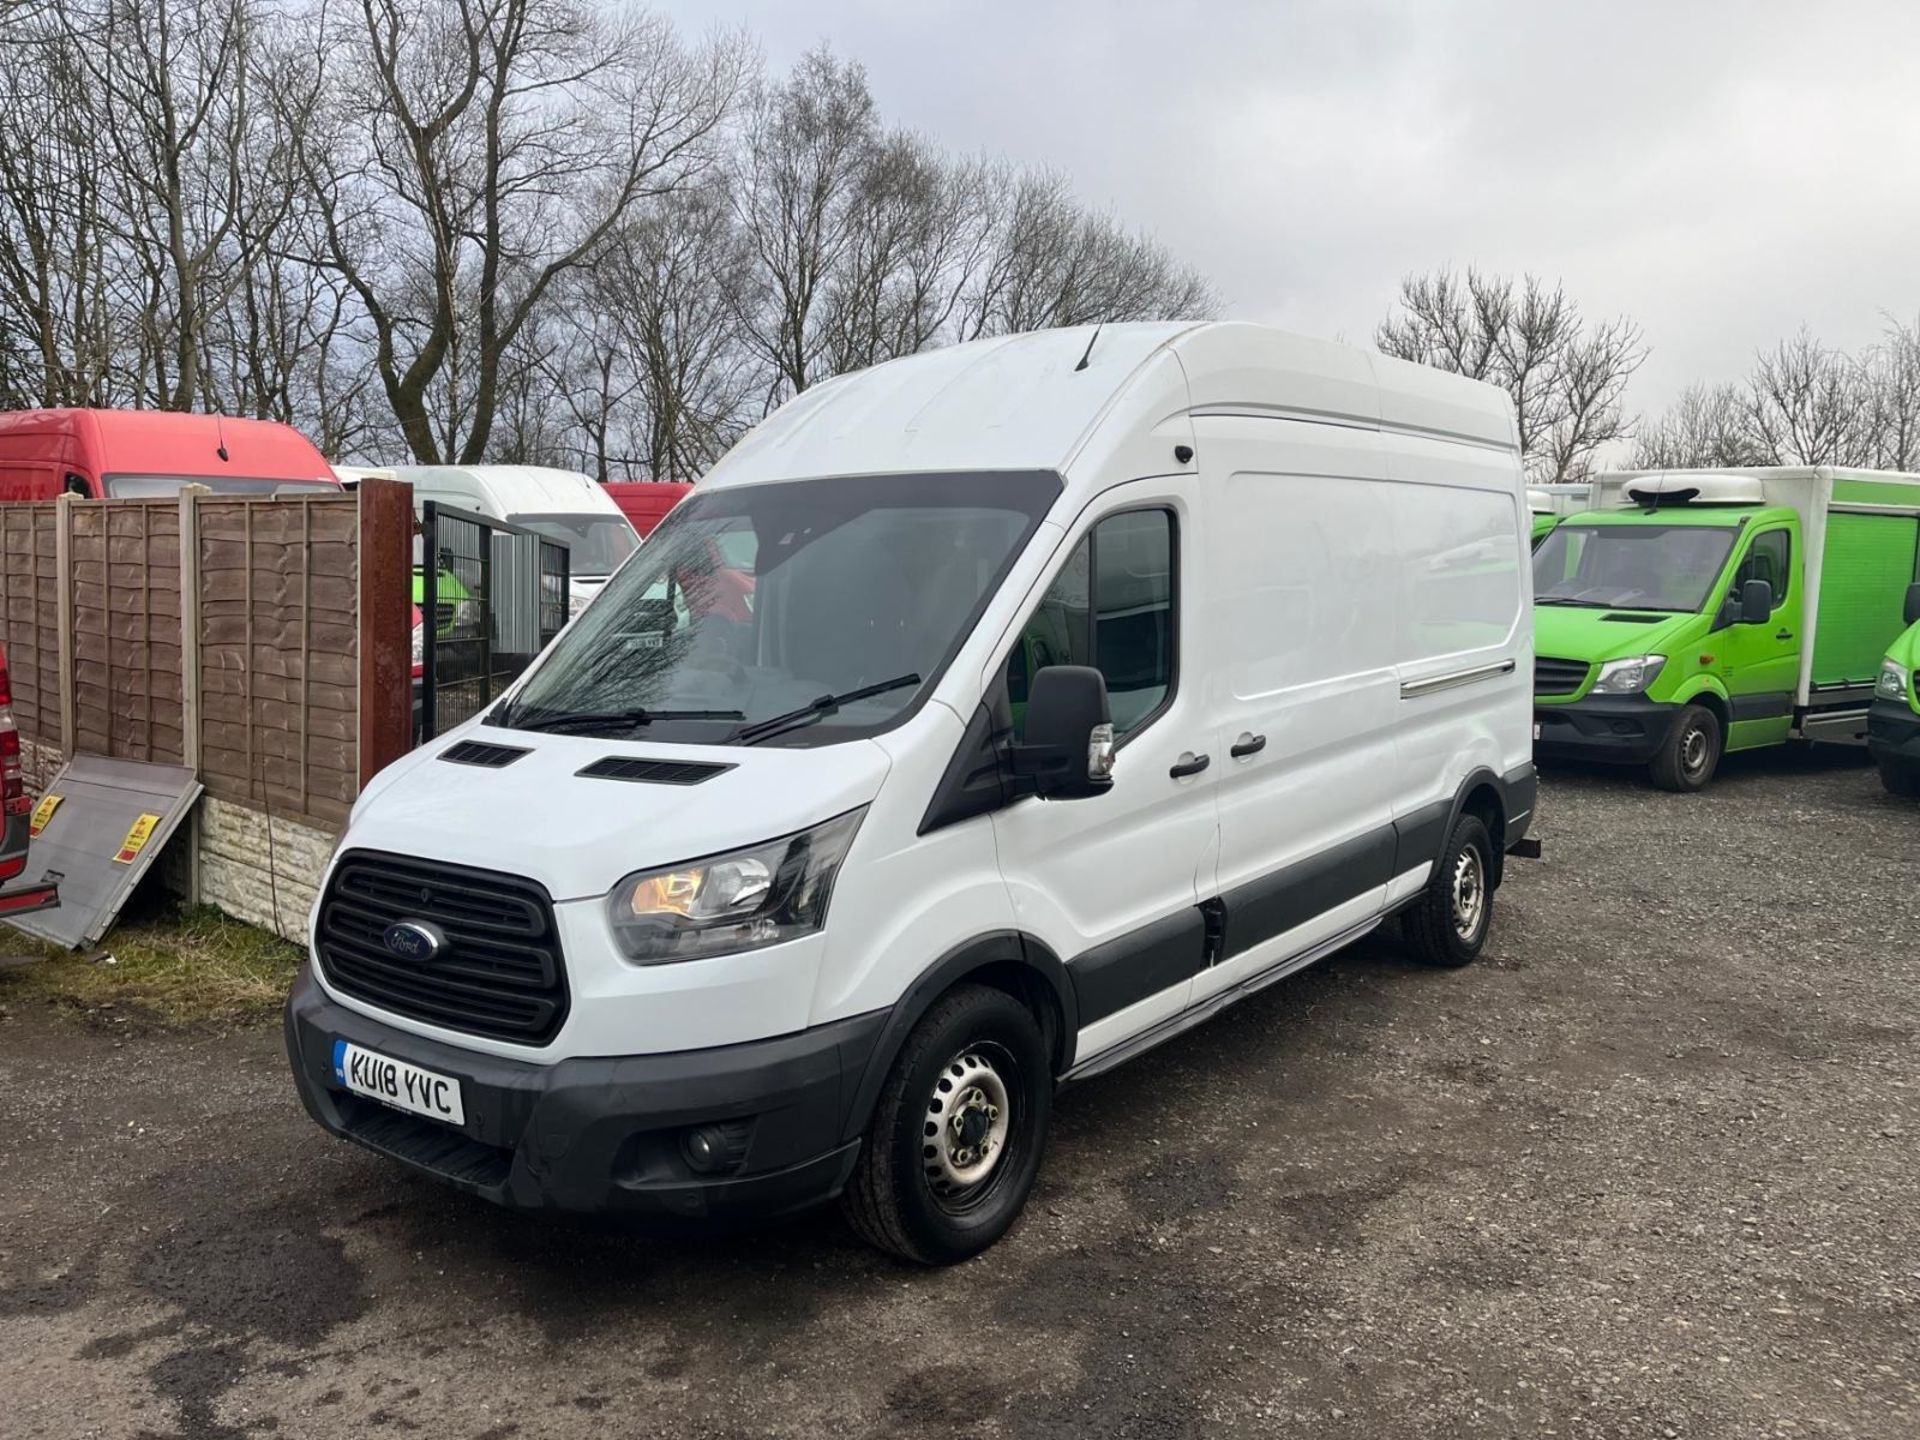 >>>SPECIAL CLEARANCE<<< 2018 FORD TRANSIT 2.0 TDCI 130PS L3 H3 - RELIABLE LONG WHEELBASE PANEL VAN - Image 2 of 11